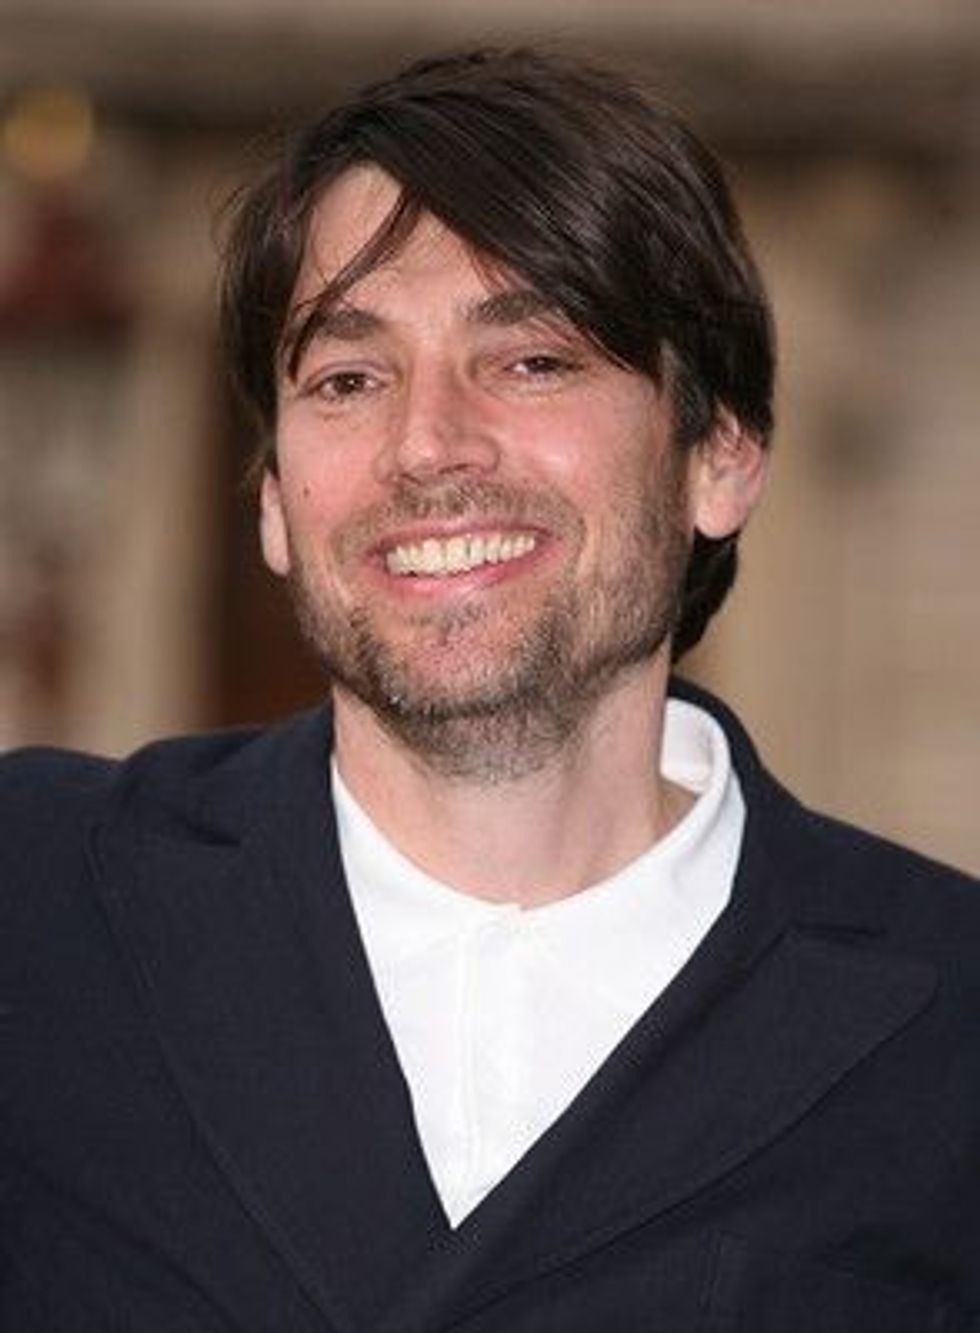 Alex James is an English musician and journalist. Learn more facts, career, and net worth here at Kidadl.